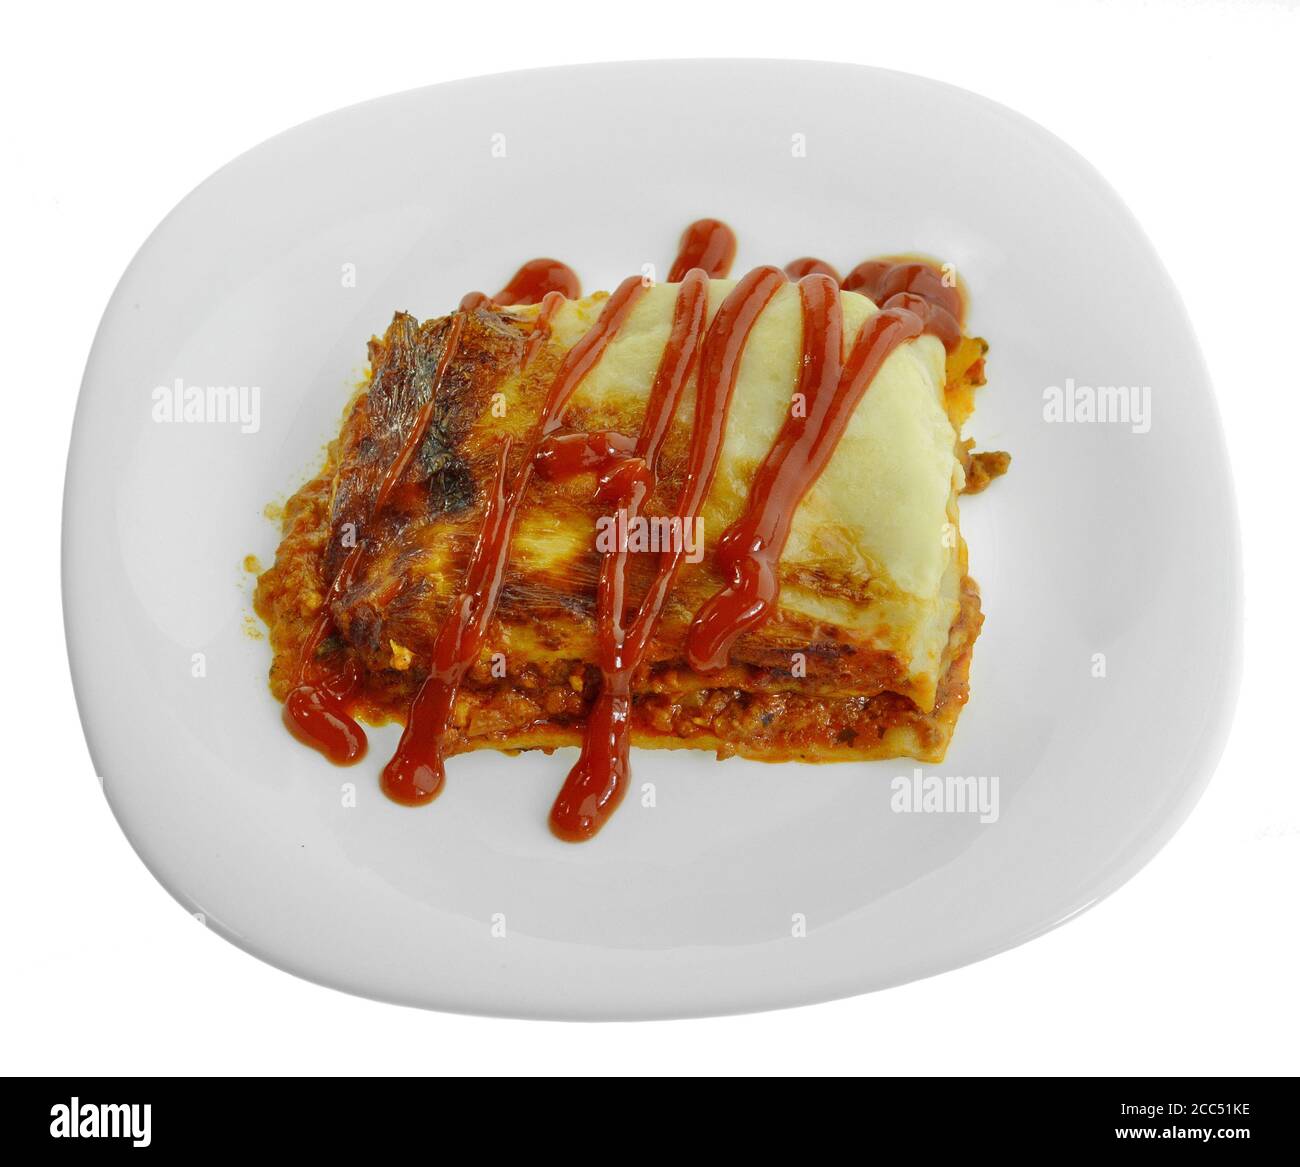 Portion of tasty lasagna. An isolated traditional lasagna made with minced beef bolognaise sauce. Tasty serving of traditional Italian lasagne with sp Stock Photo